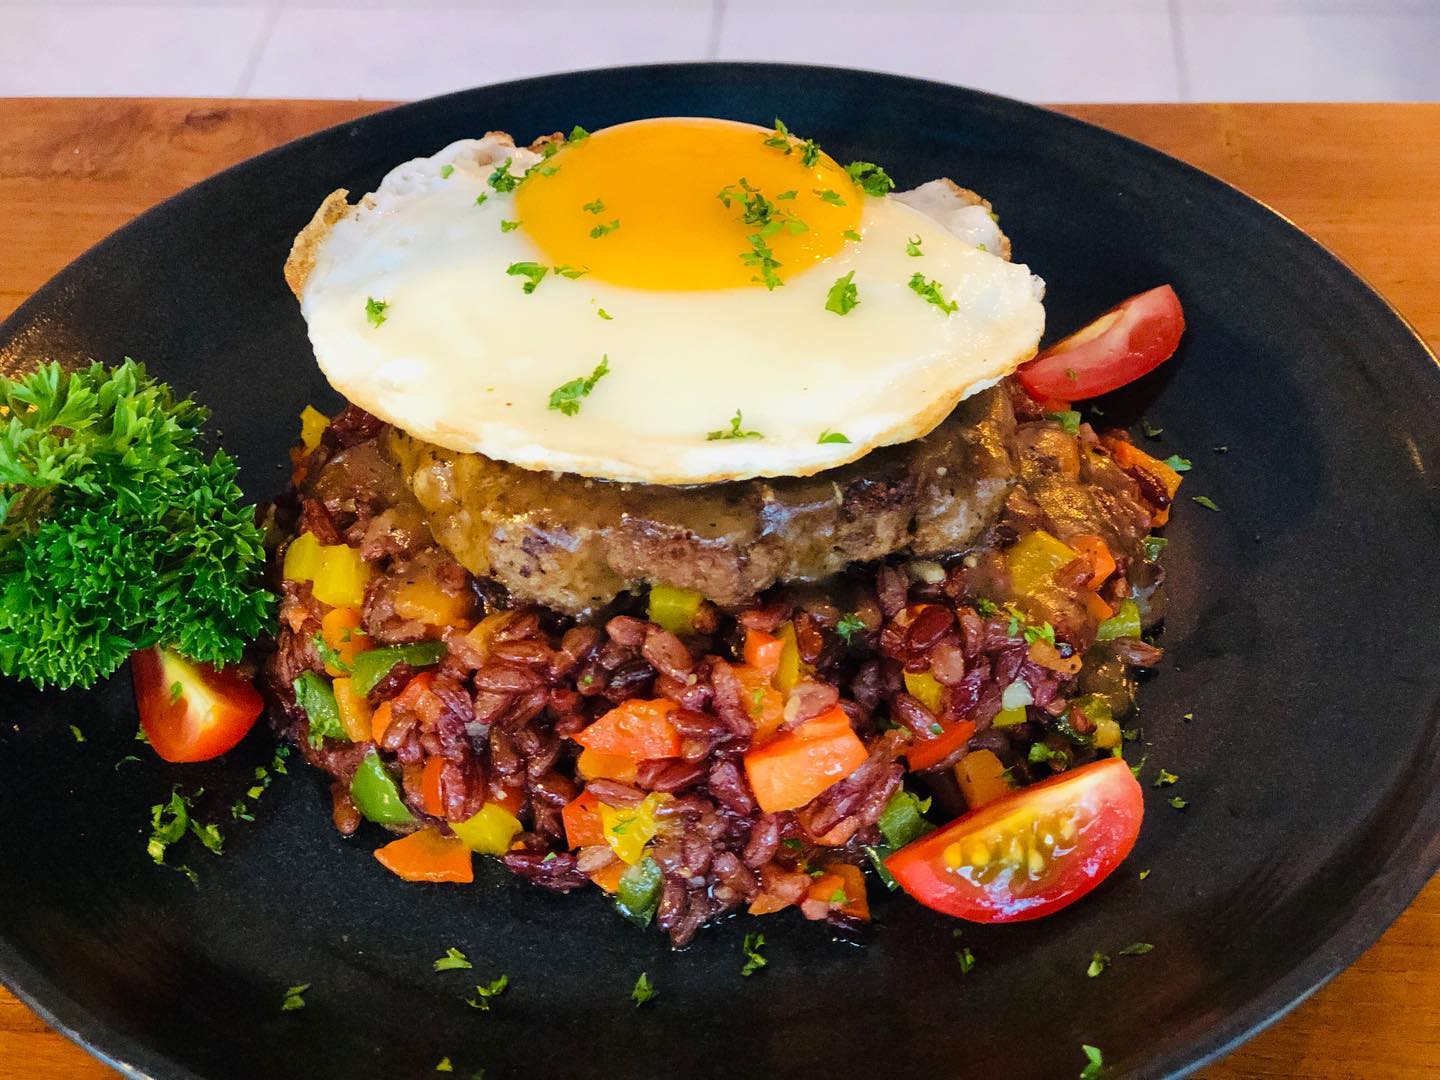 Loco moco : Arabic red rice with beef patty and eggs on top , 381 calories and with 34g of protein, it’s one of our meal plan dishes.